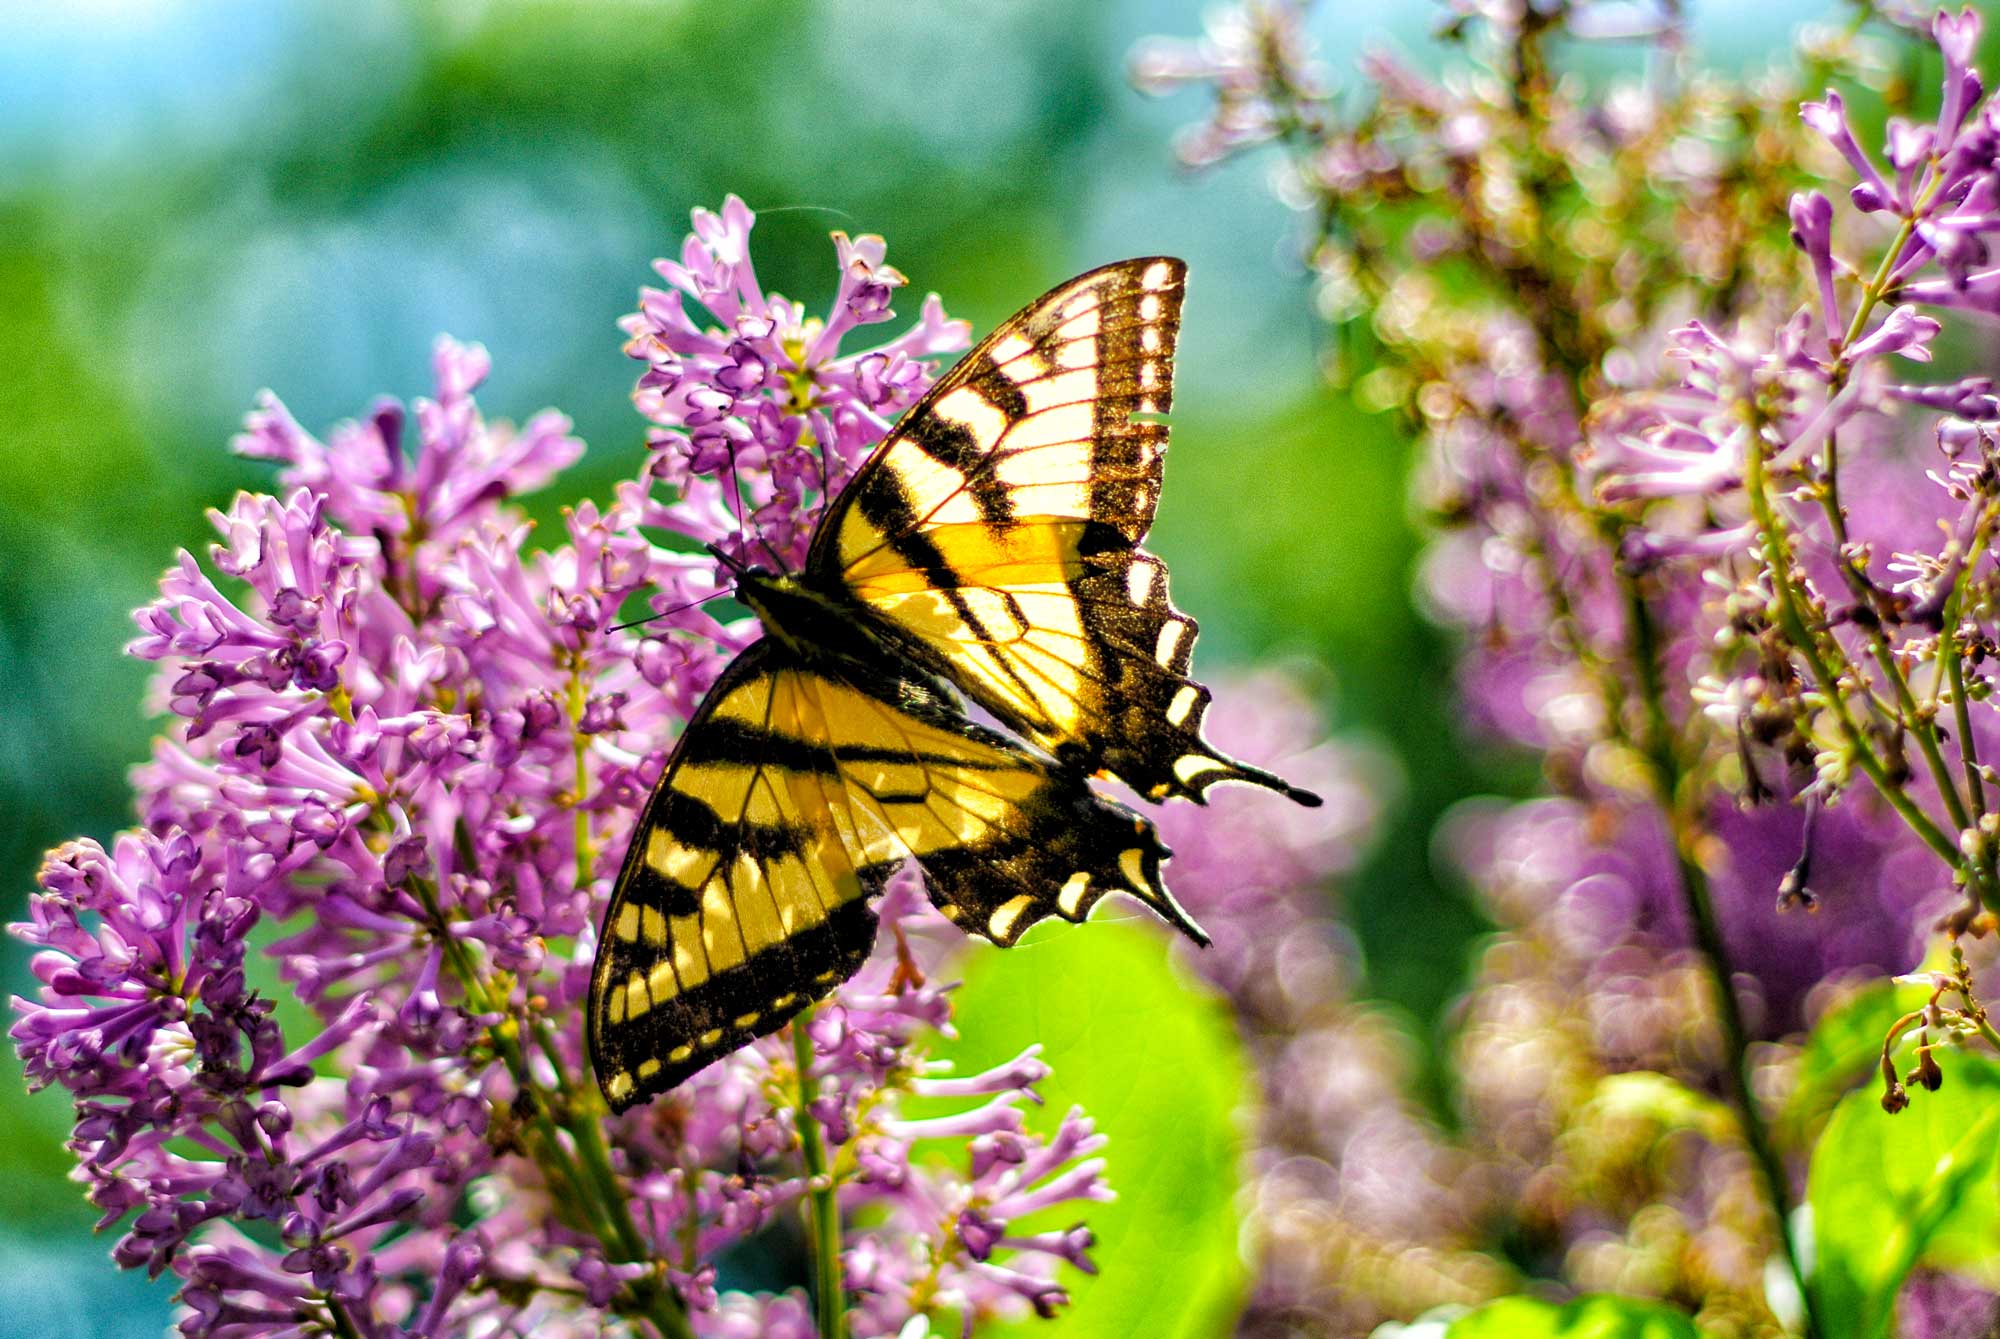 Black and yellow swallowtail butterfly on lilac